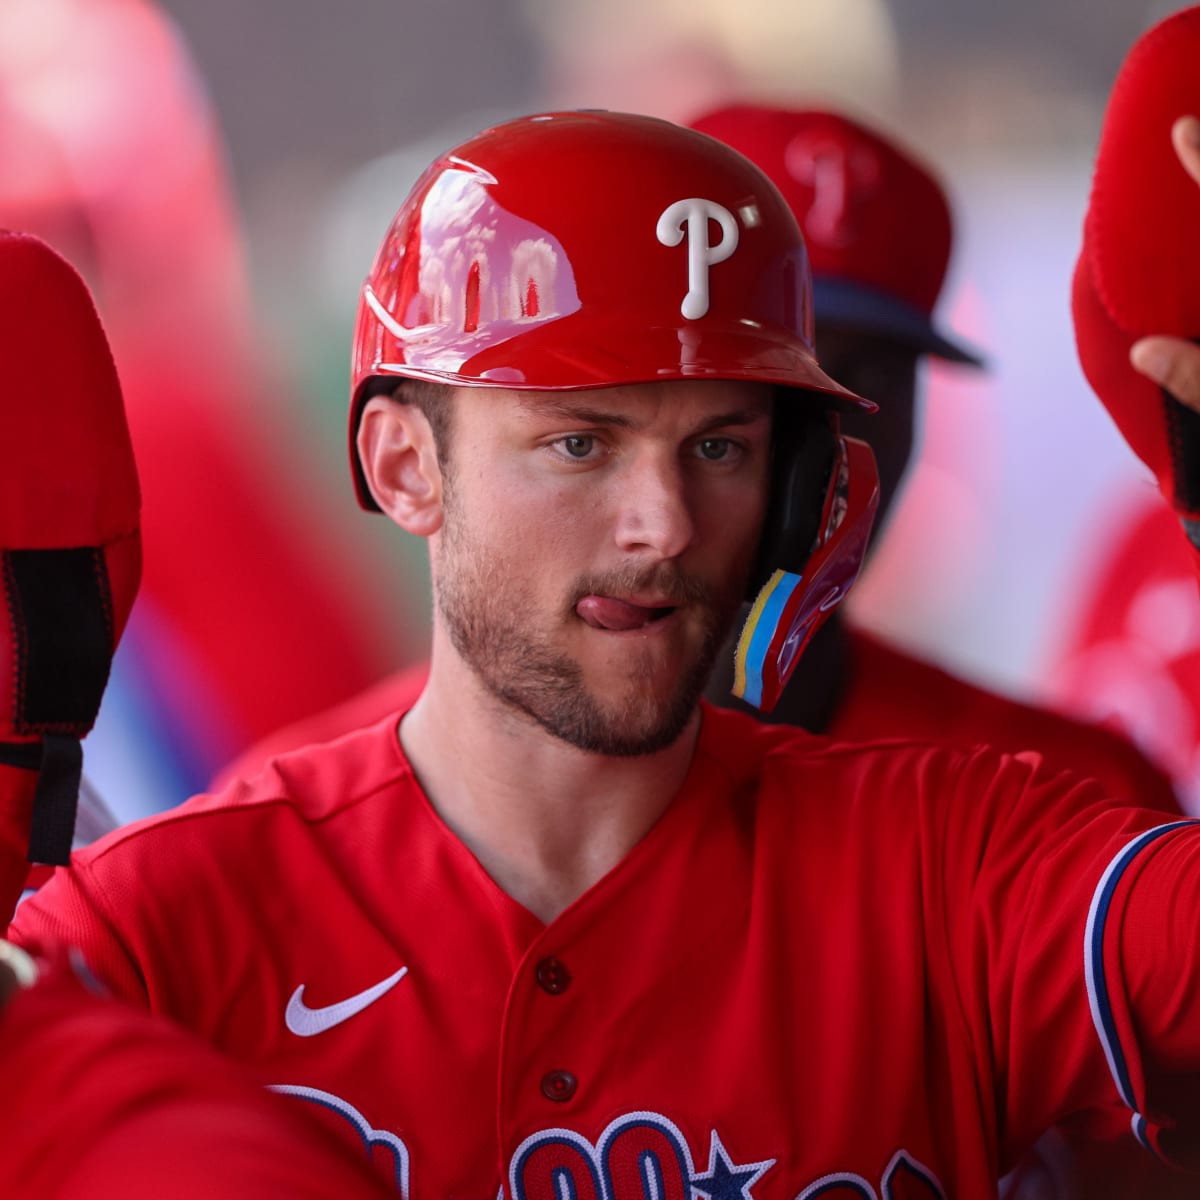 All About Trea Turner, the Philadelphia Phillies Star Dominating